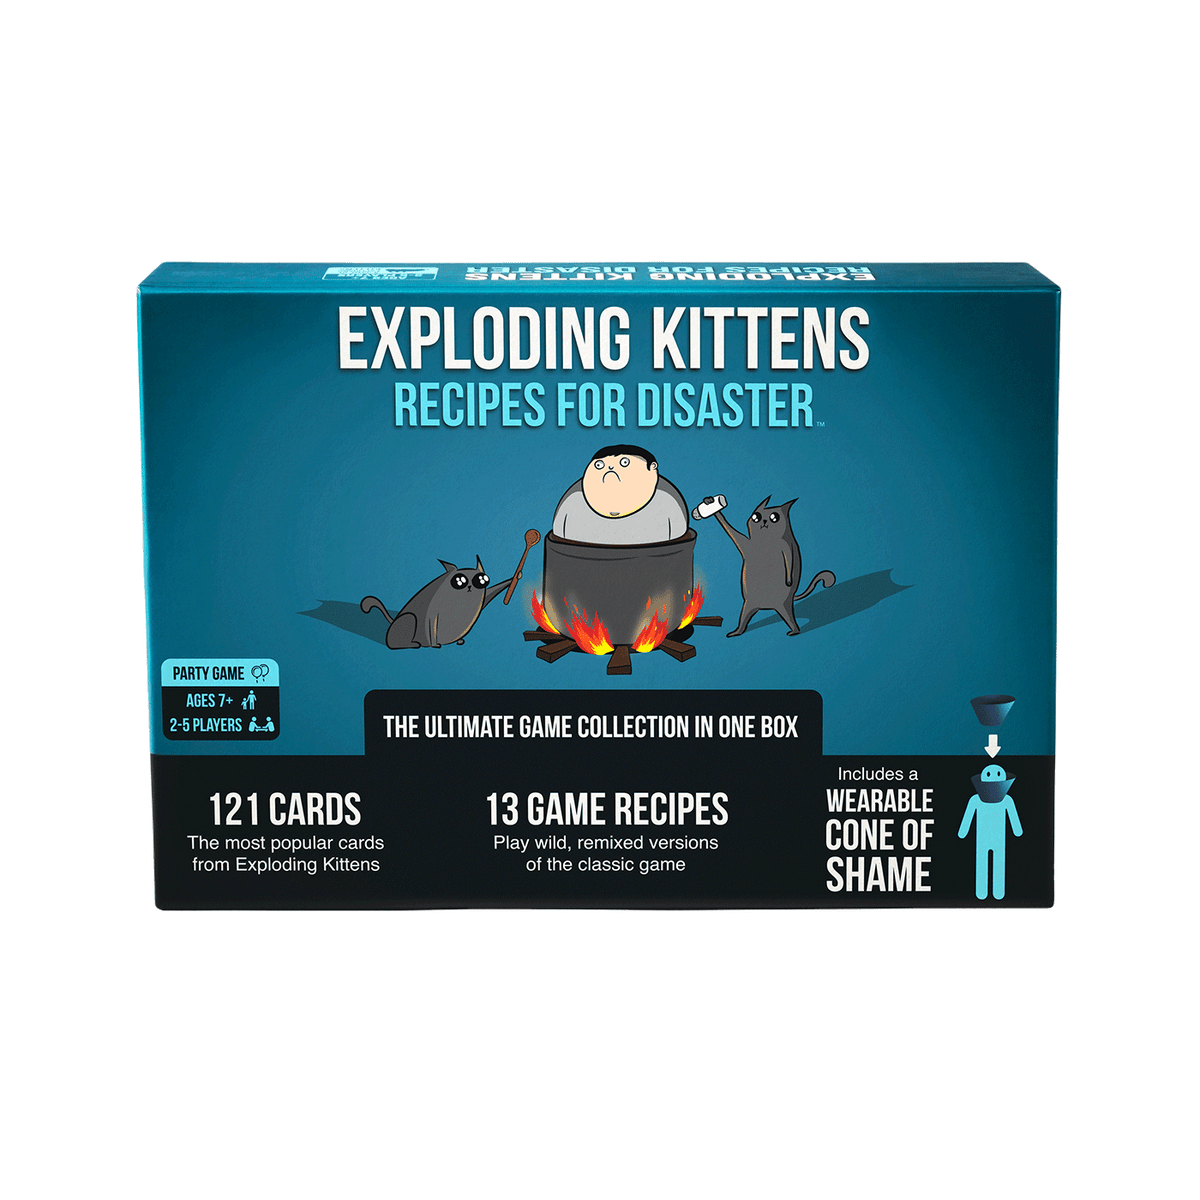 Exploding Kittens Game Night In A Box: 4 Games 1 Box